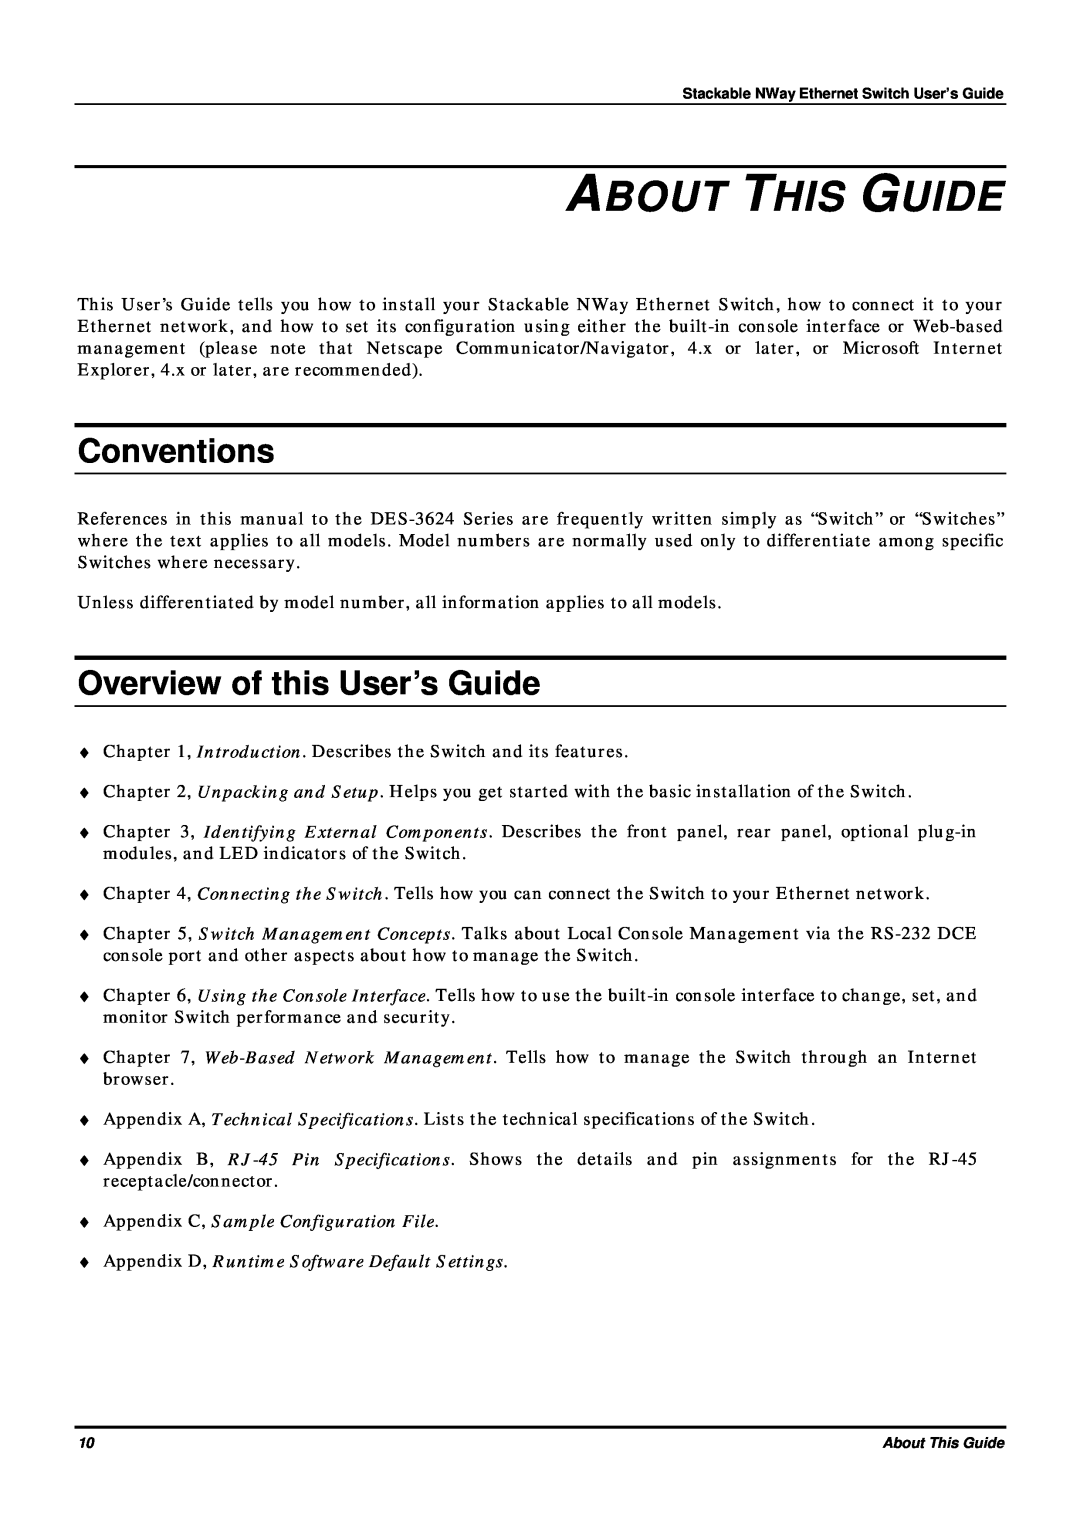 D-Link DES-3624 manual About This Guide, Conventions, Overview of this User’s Guide 